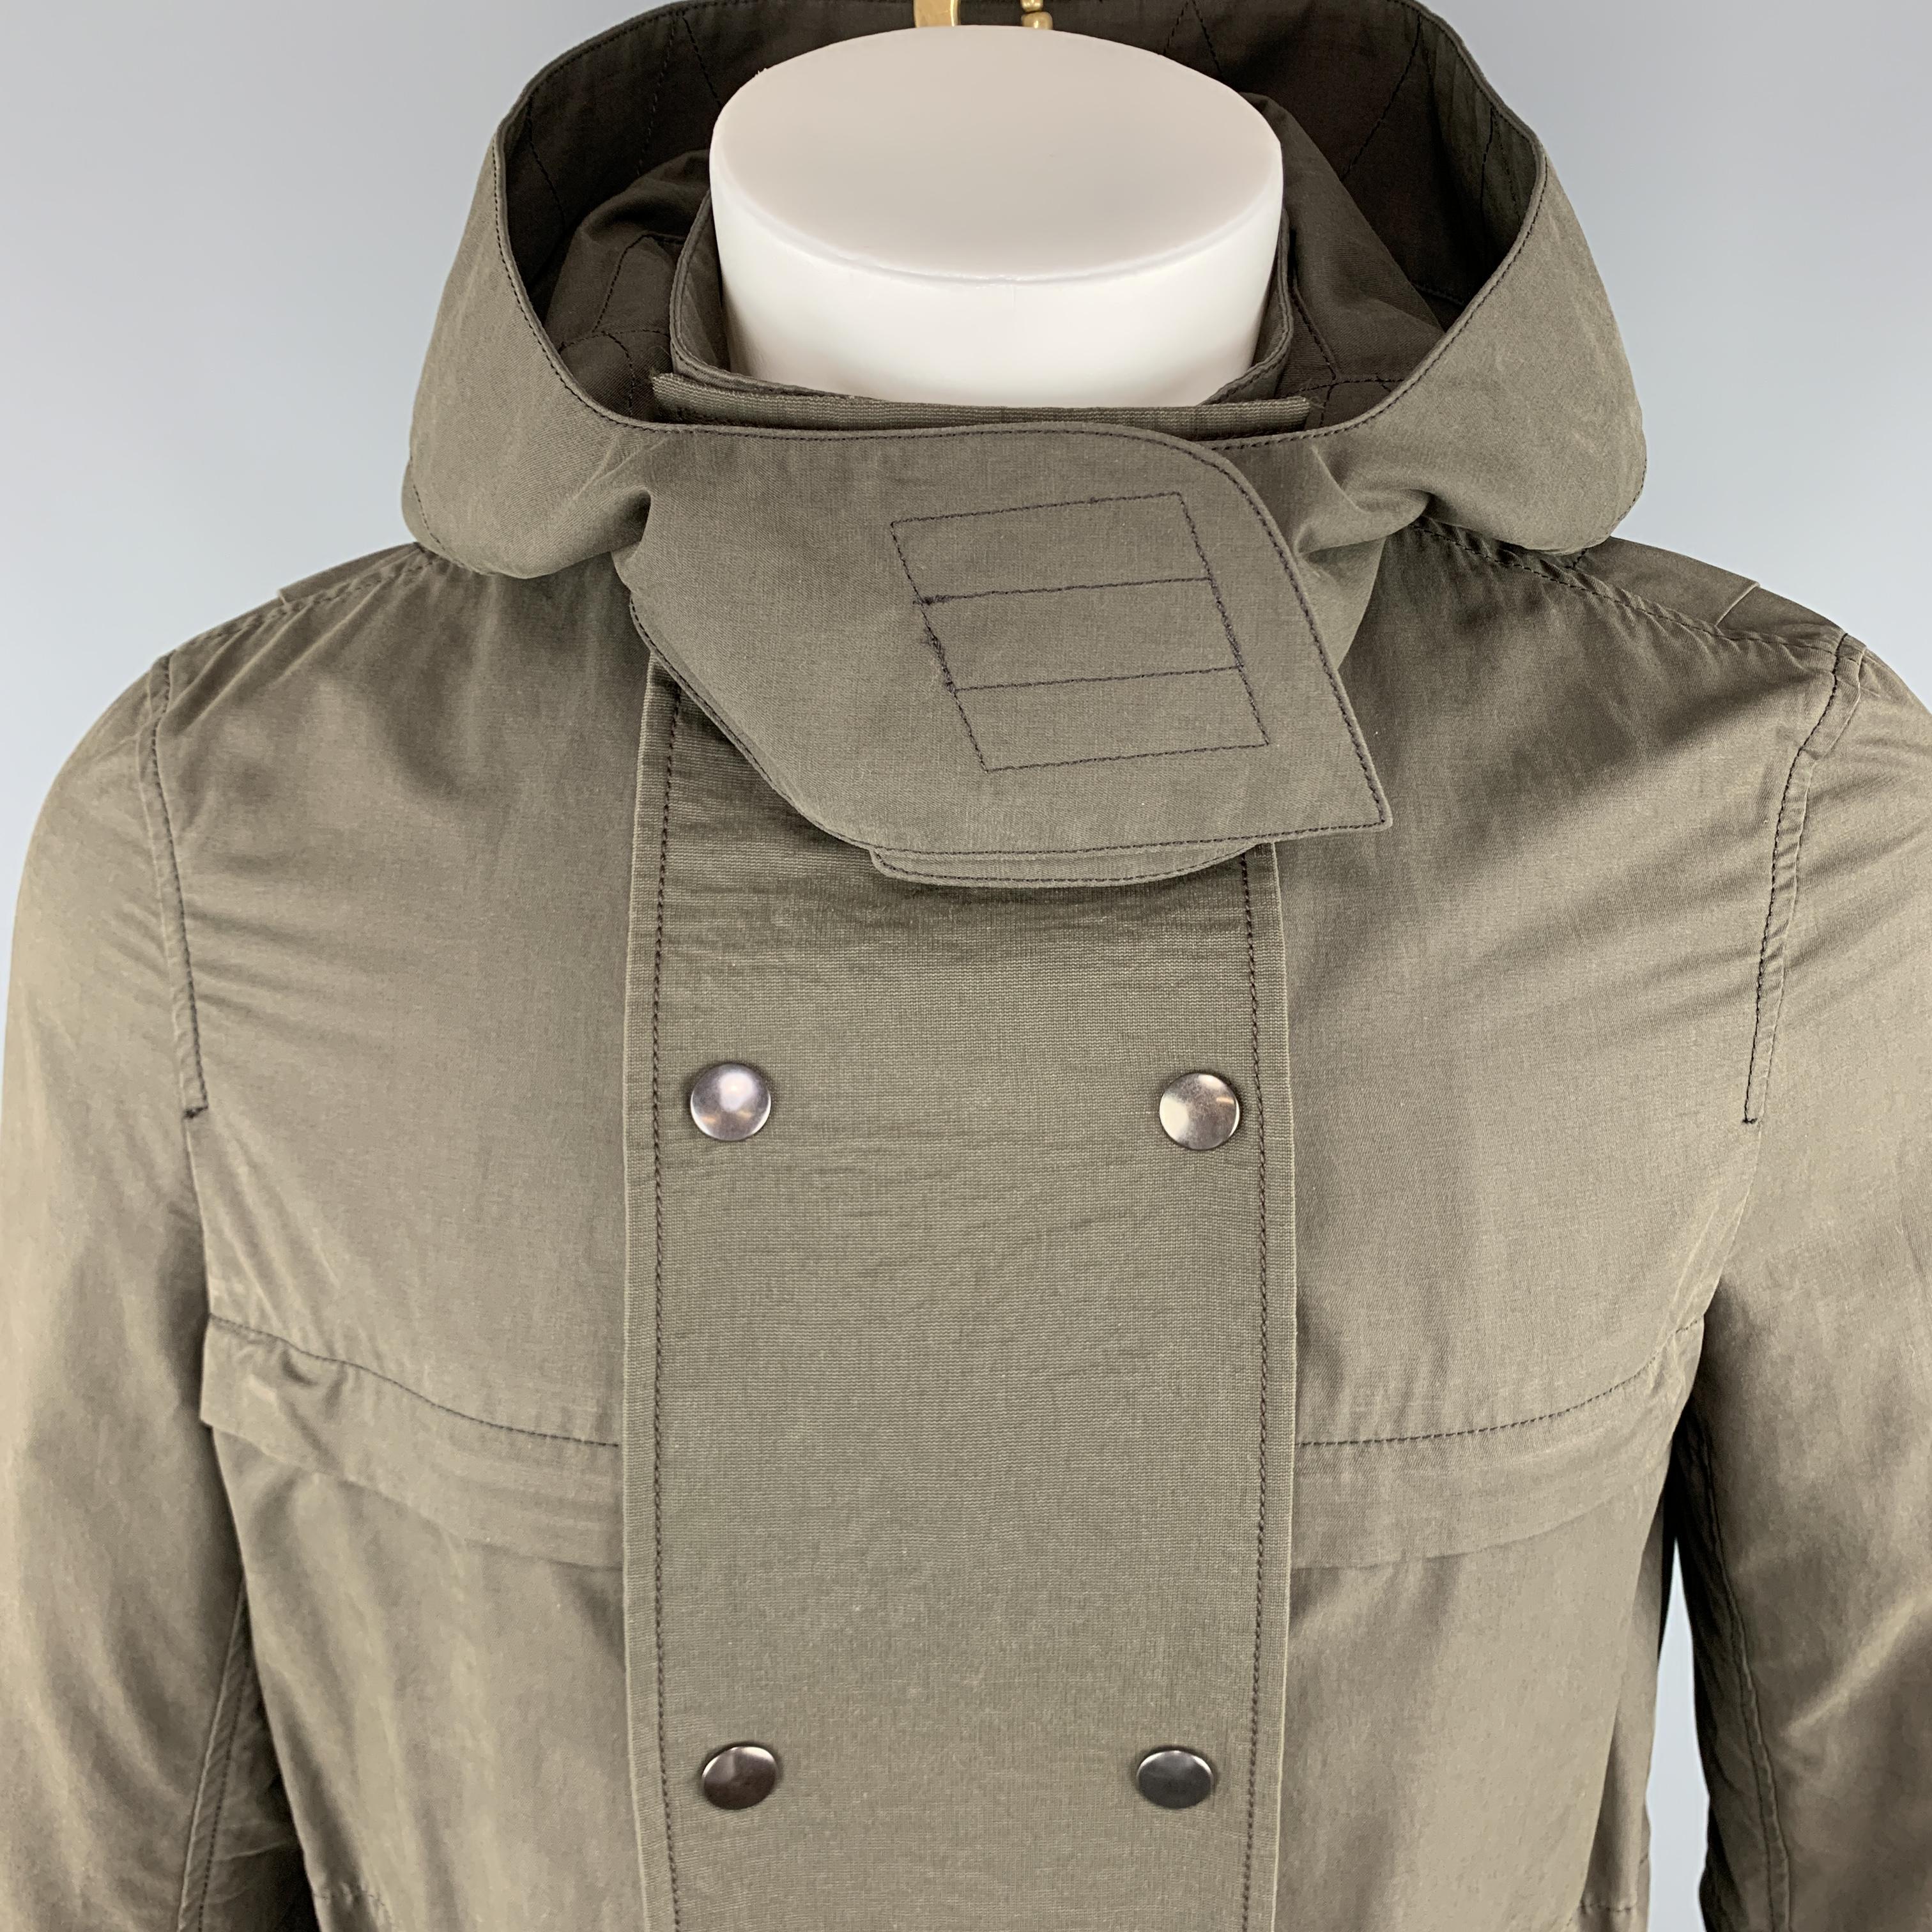 HELMUT LANG Jacket comes in an olive tone in a solid cotton / nylon material, with a high collar, a detachable hood and chest patch detail, zip and cargo pockets, unbuttoned cuffs, zip closure, a drawstring, unlined.

Excellent Pre-Owned